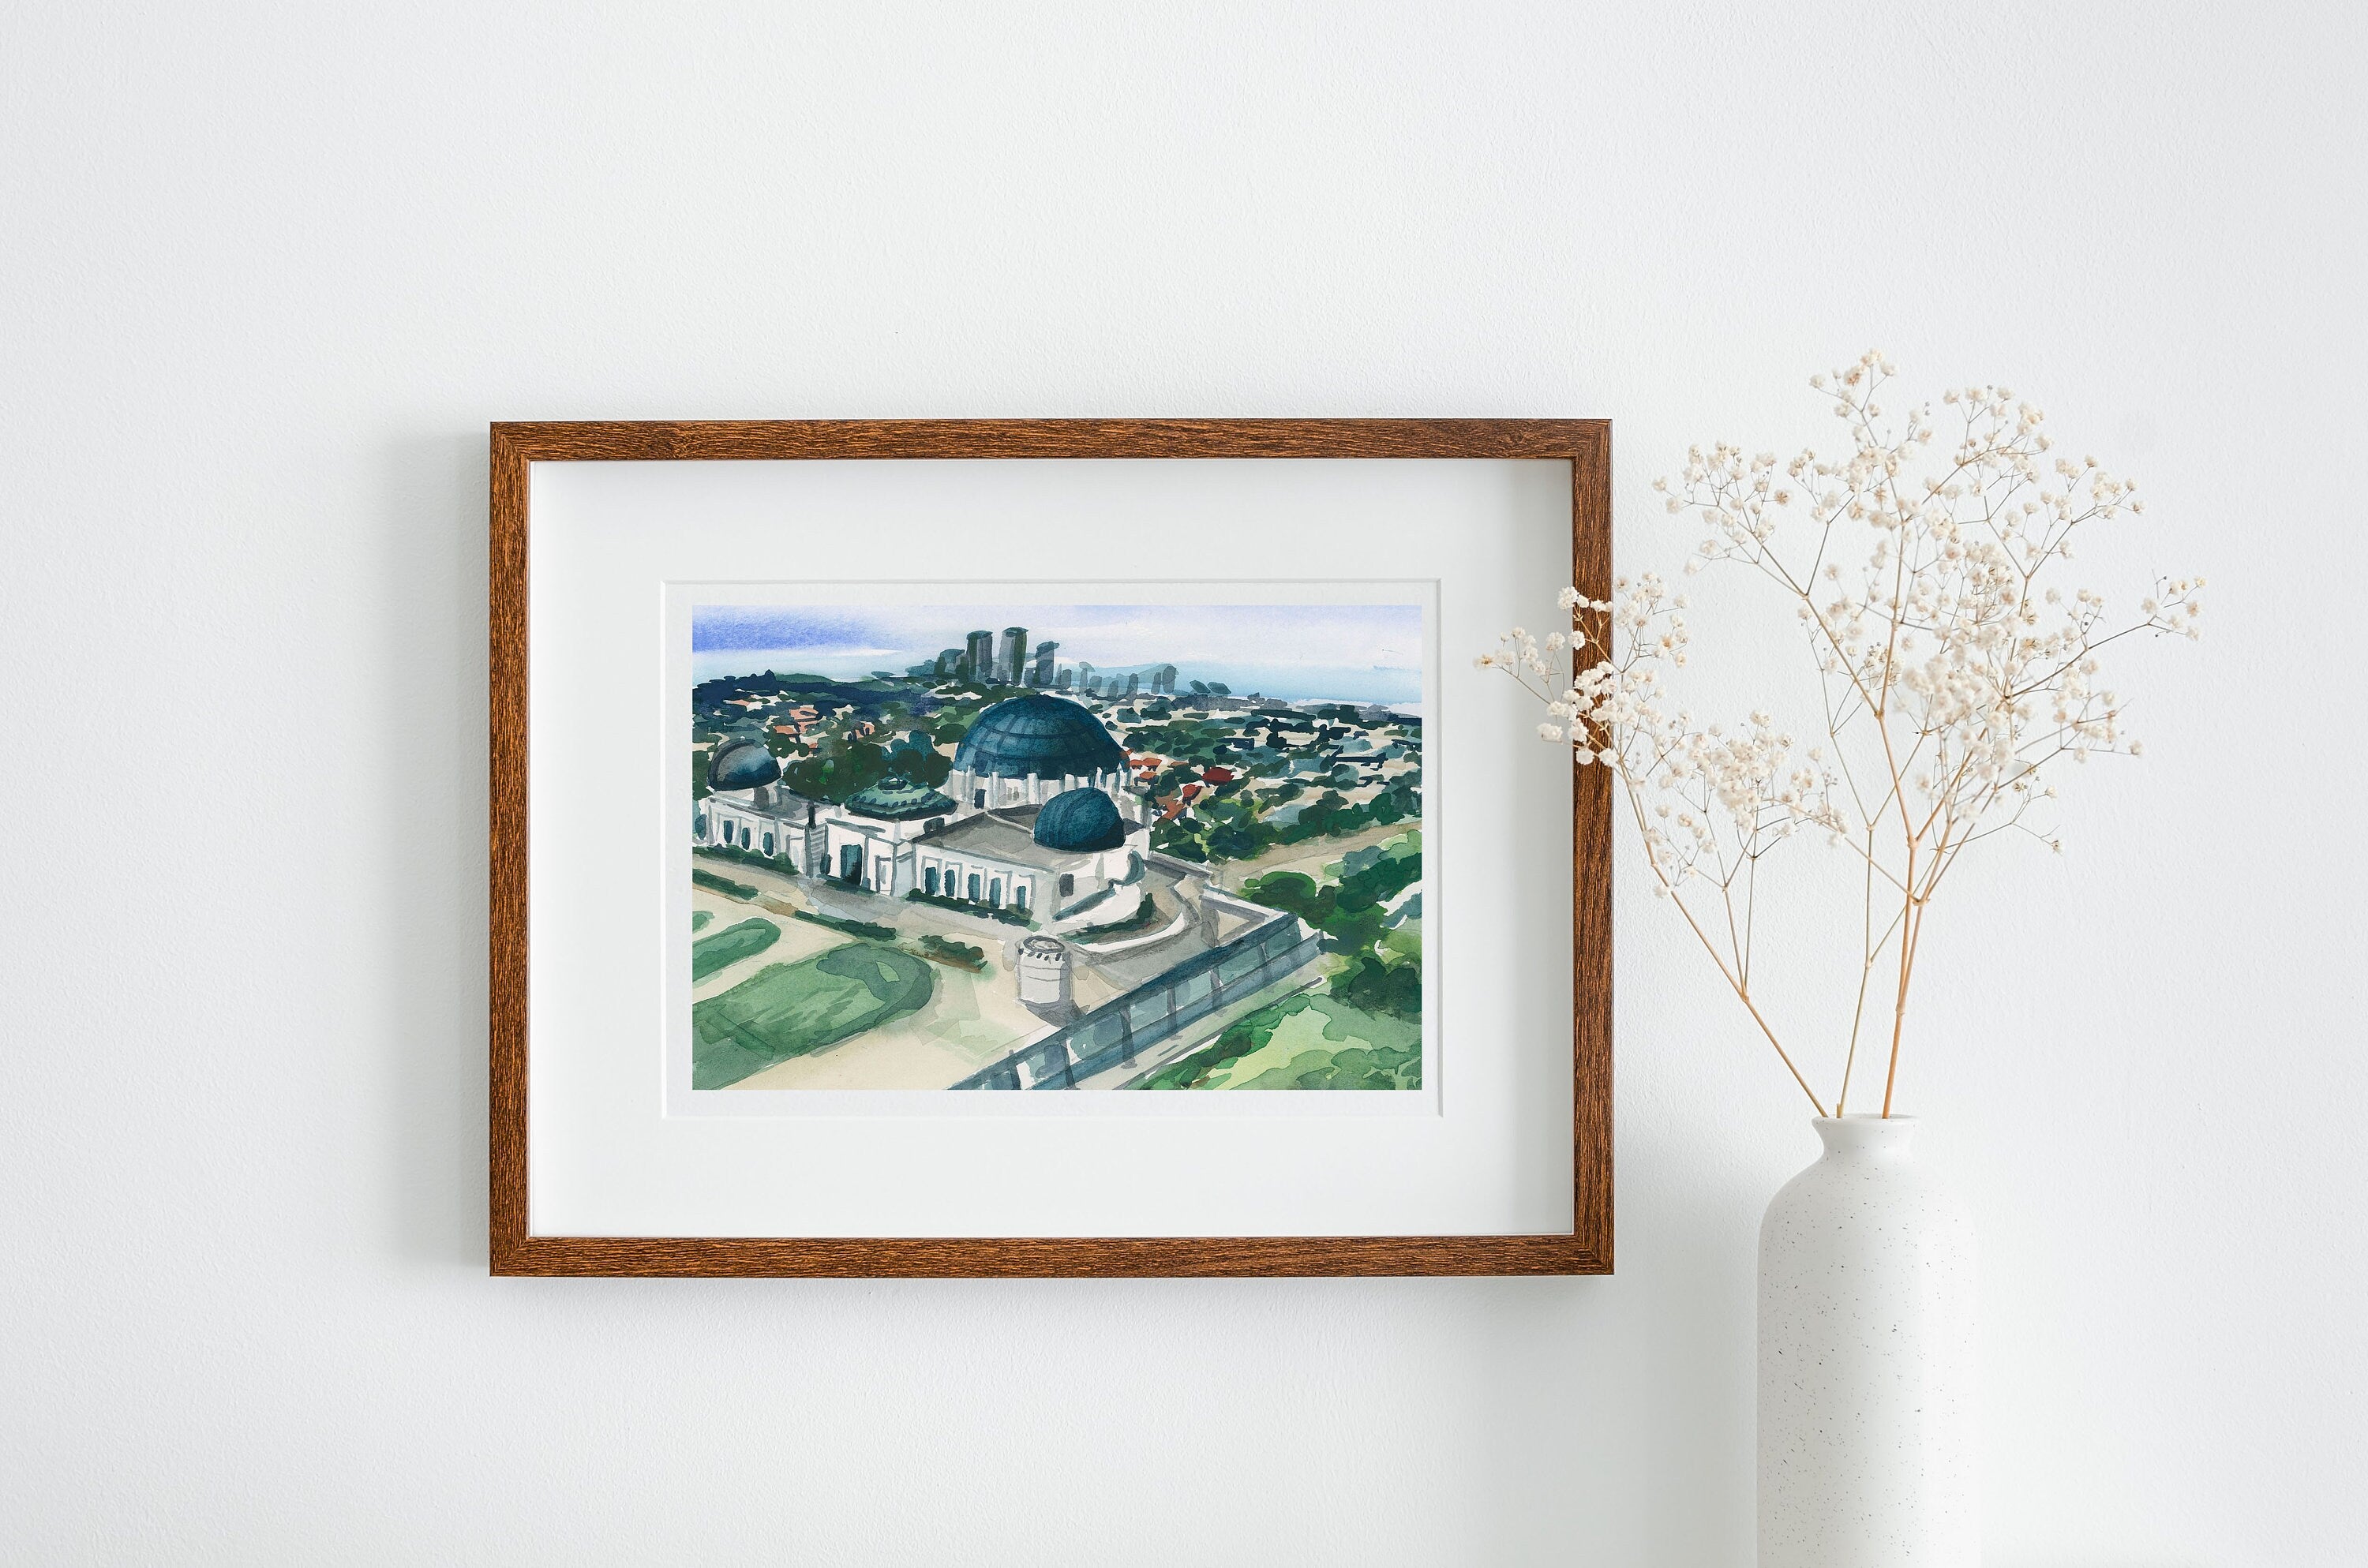 Griffith observatory print of painting by Medjool Studio. Print of a watercolor of the Griffith Observatory Park in the Hollywood Hills. This Los Angeles poster combines the downtown in the distance with the green space that the park offers.